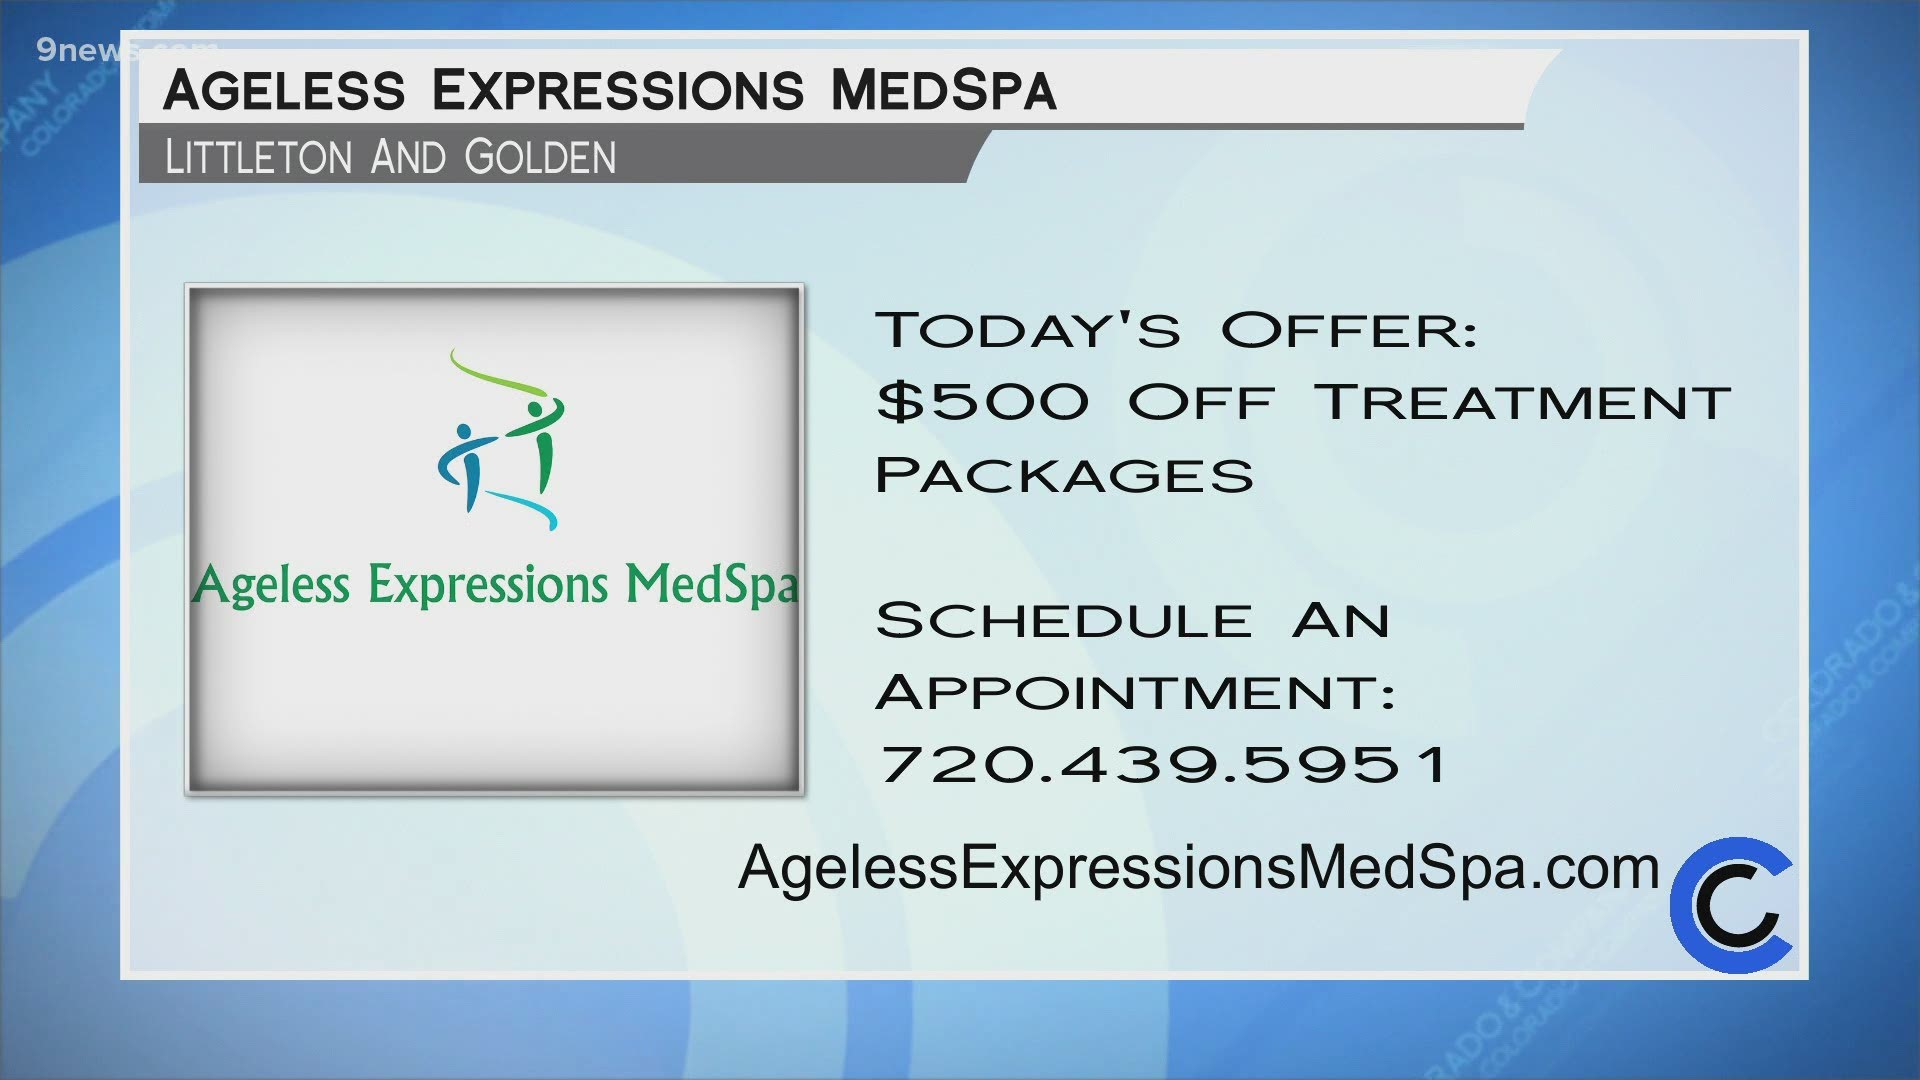 Learn more about the treatments provided by Ageless Expressions at AgelessExpressionsMedSpa.com or call 720.439.5951. You can find them in Littleton and Golden.